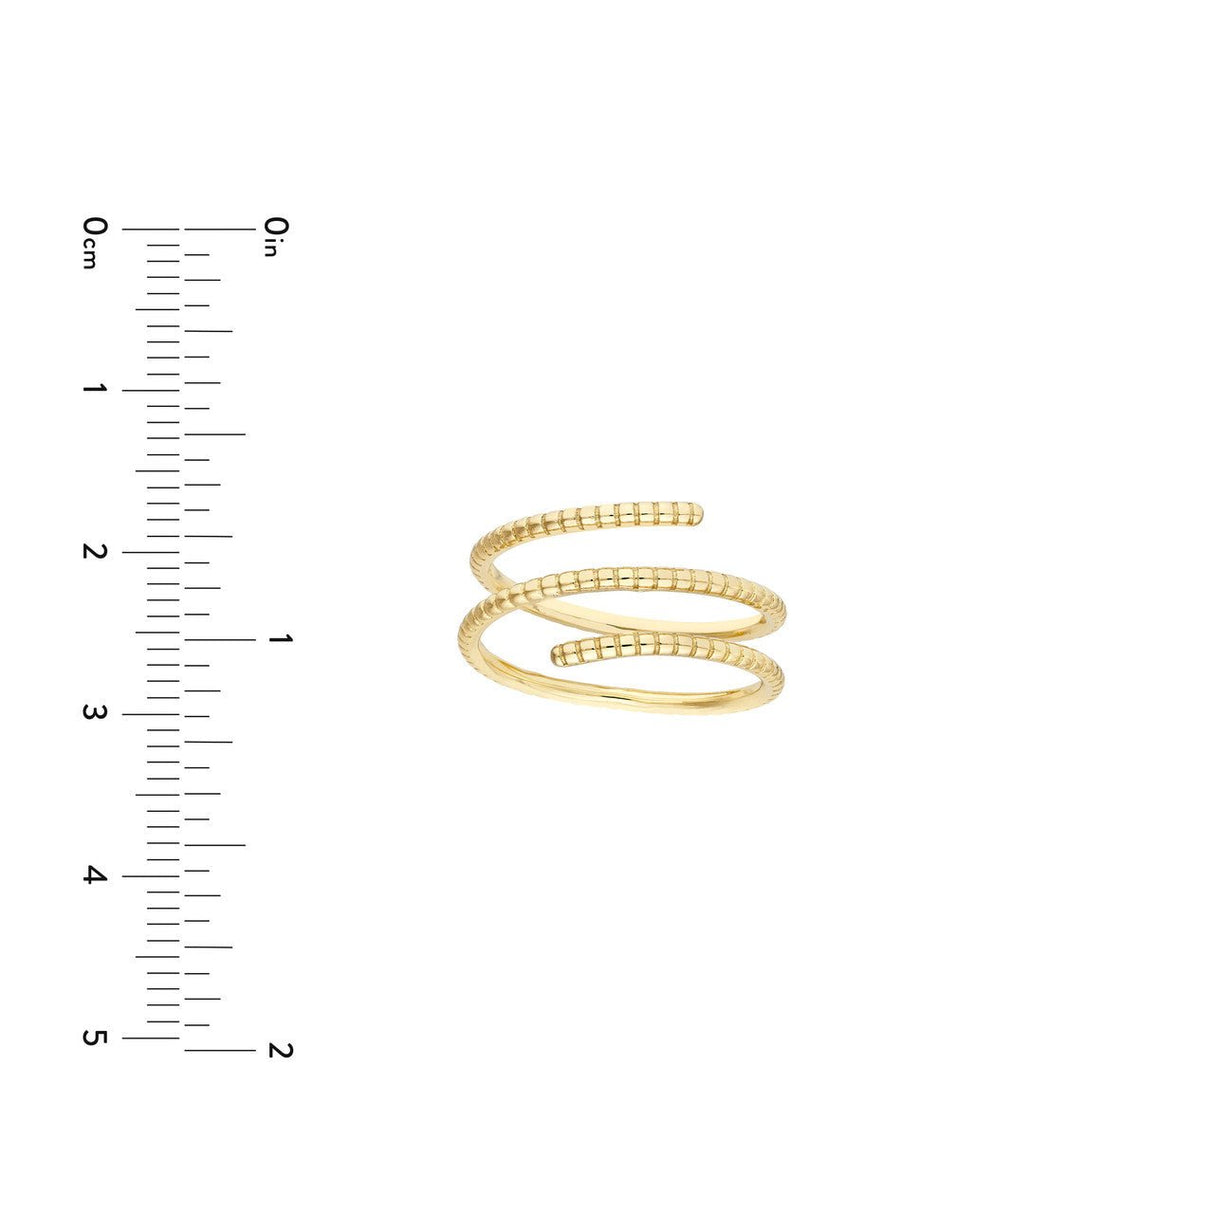 Ribbed Texture Wrap Ring,  The Diamond Origin Ribbed Texture Wrap Ring is crafted from 14k gold, making it a luxurious, modern accessory. With its elegant, fashionable design, this piece is sure to make a statement. The unique ribbed texture will add a touch of texture and style to any of your look.  Elegant, fashionable, and trendy gold ring,  Gold ring from Diamond Origin,